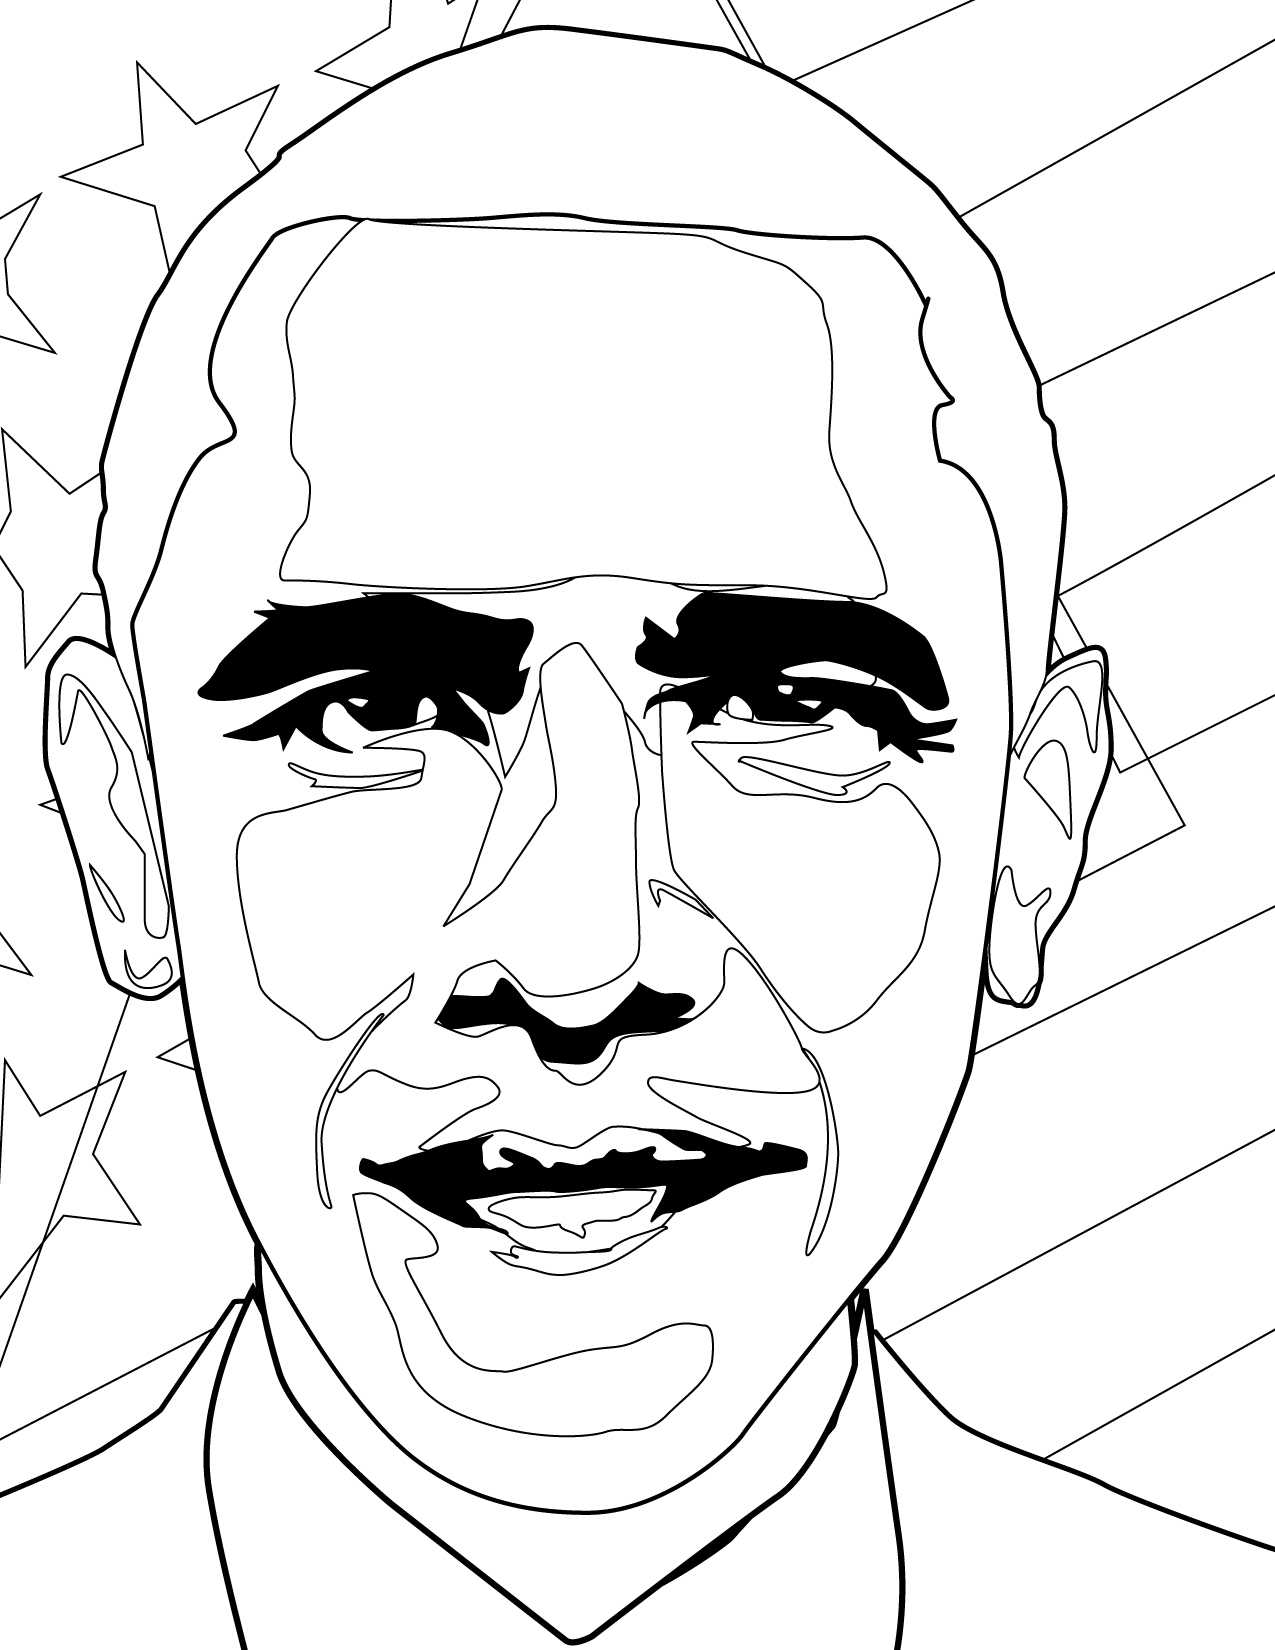 obama coloring book pages - photo #25